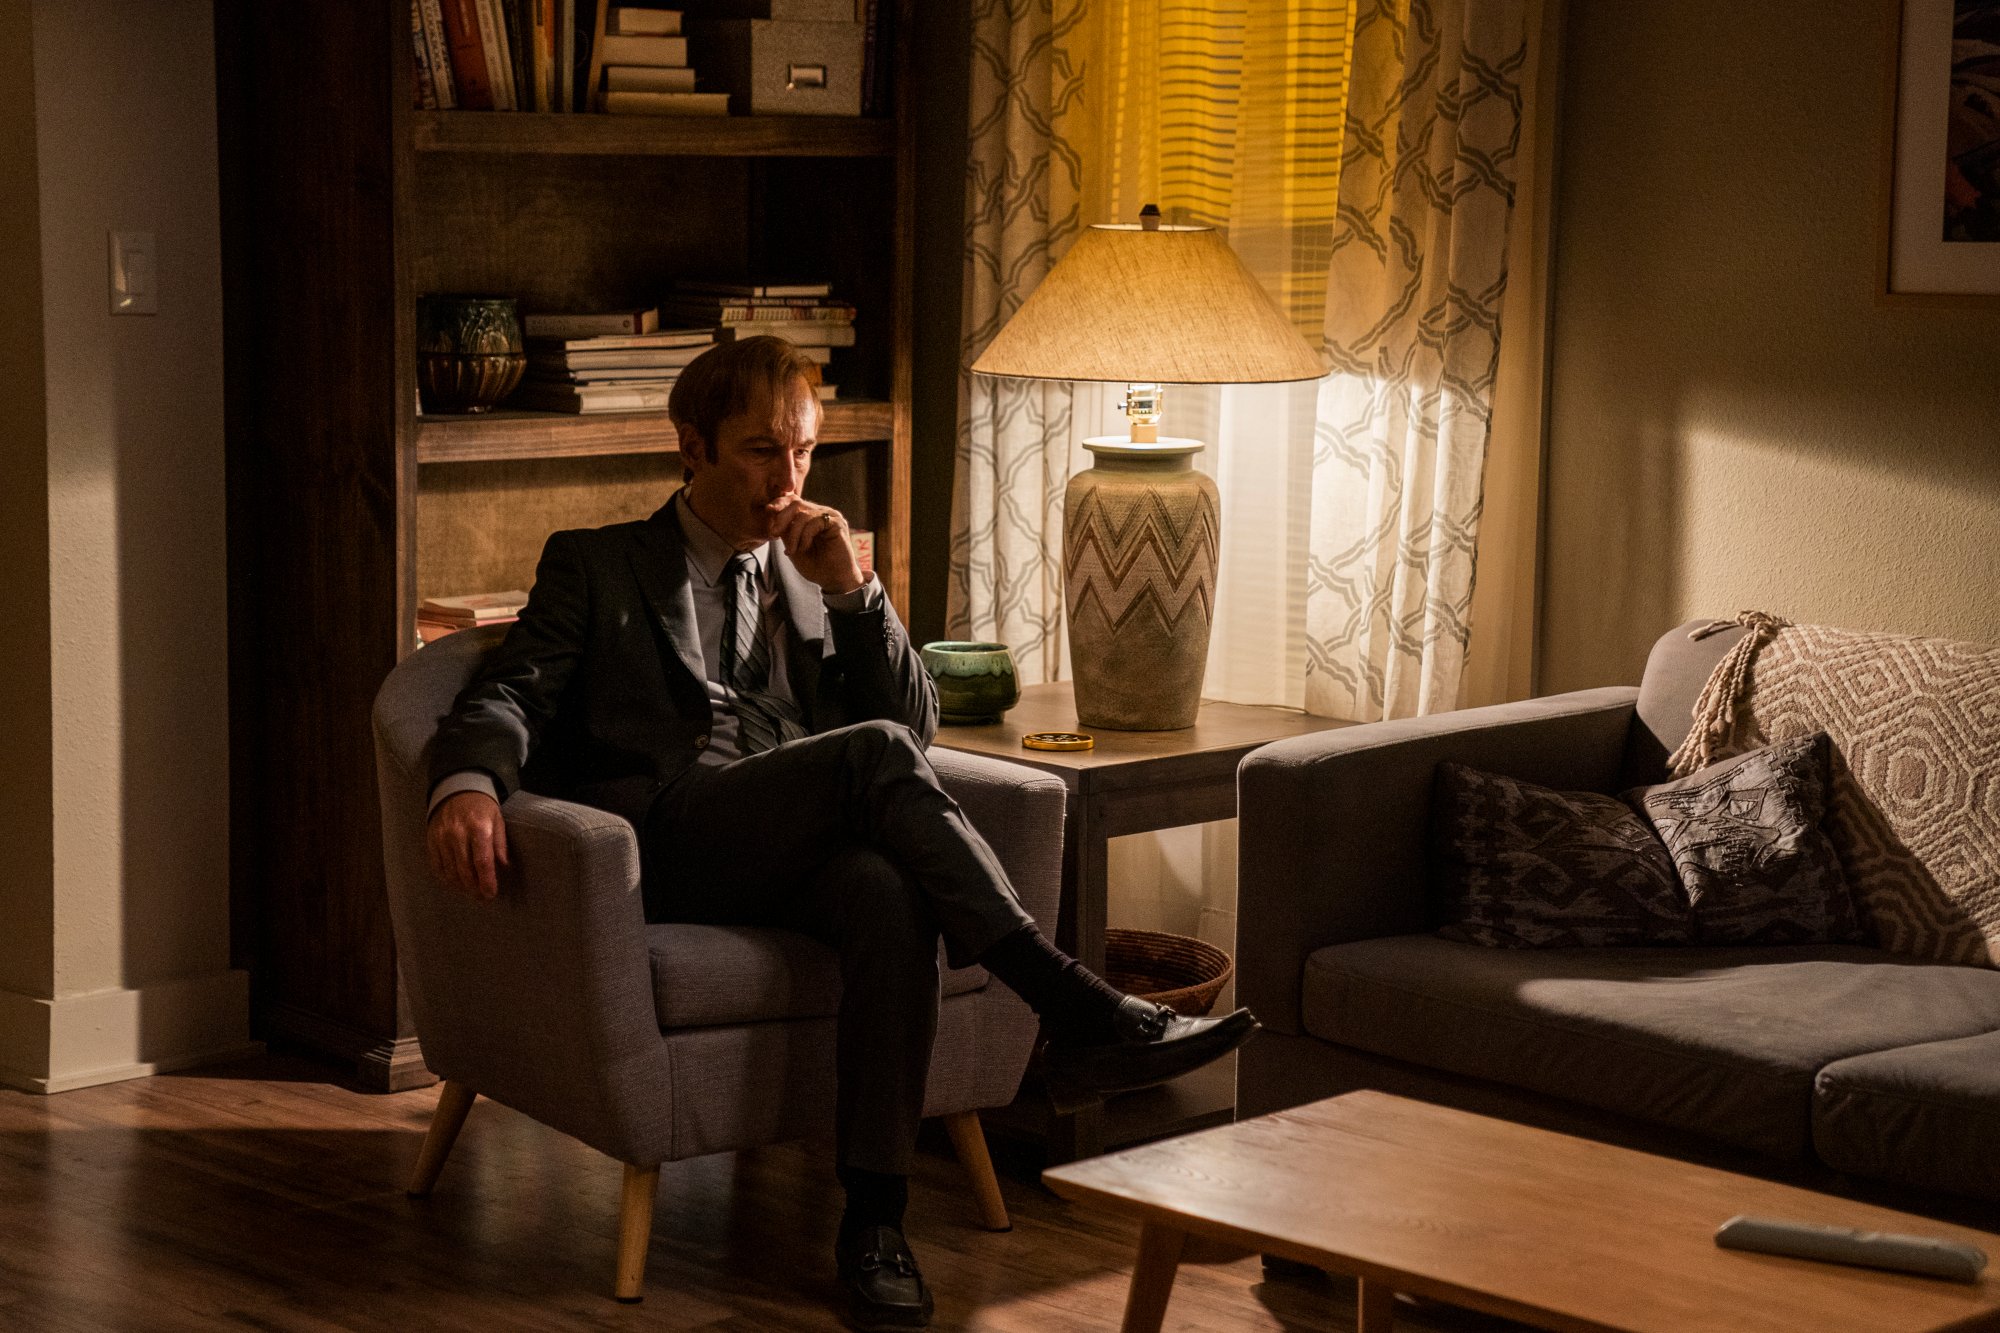 Bob Odenkirk as Saul Goodman in 'Better Call Saul' Season 6 Episode 9. He's sitting in a chair and looks contemplative.